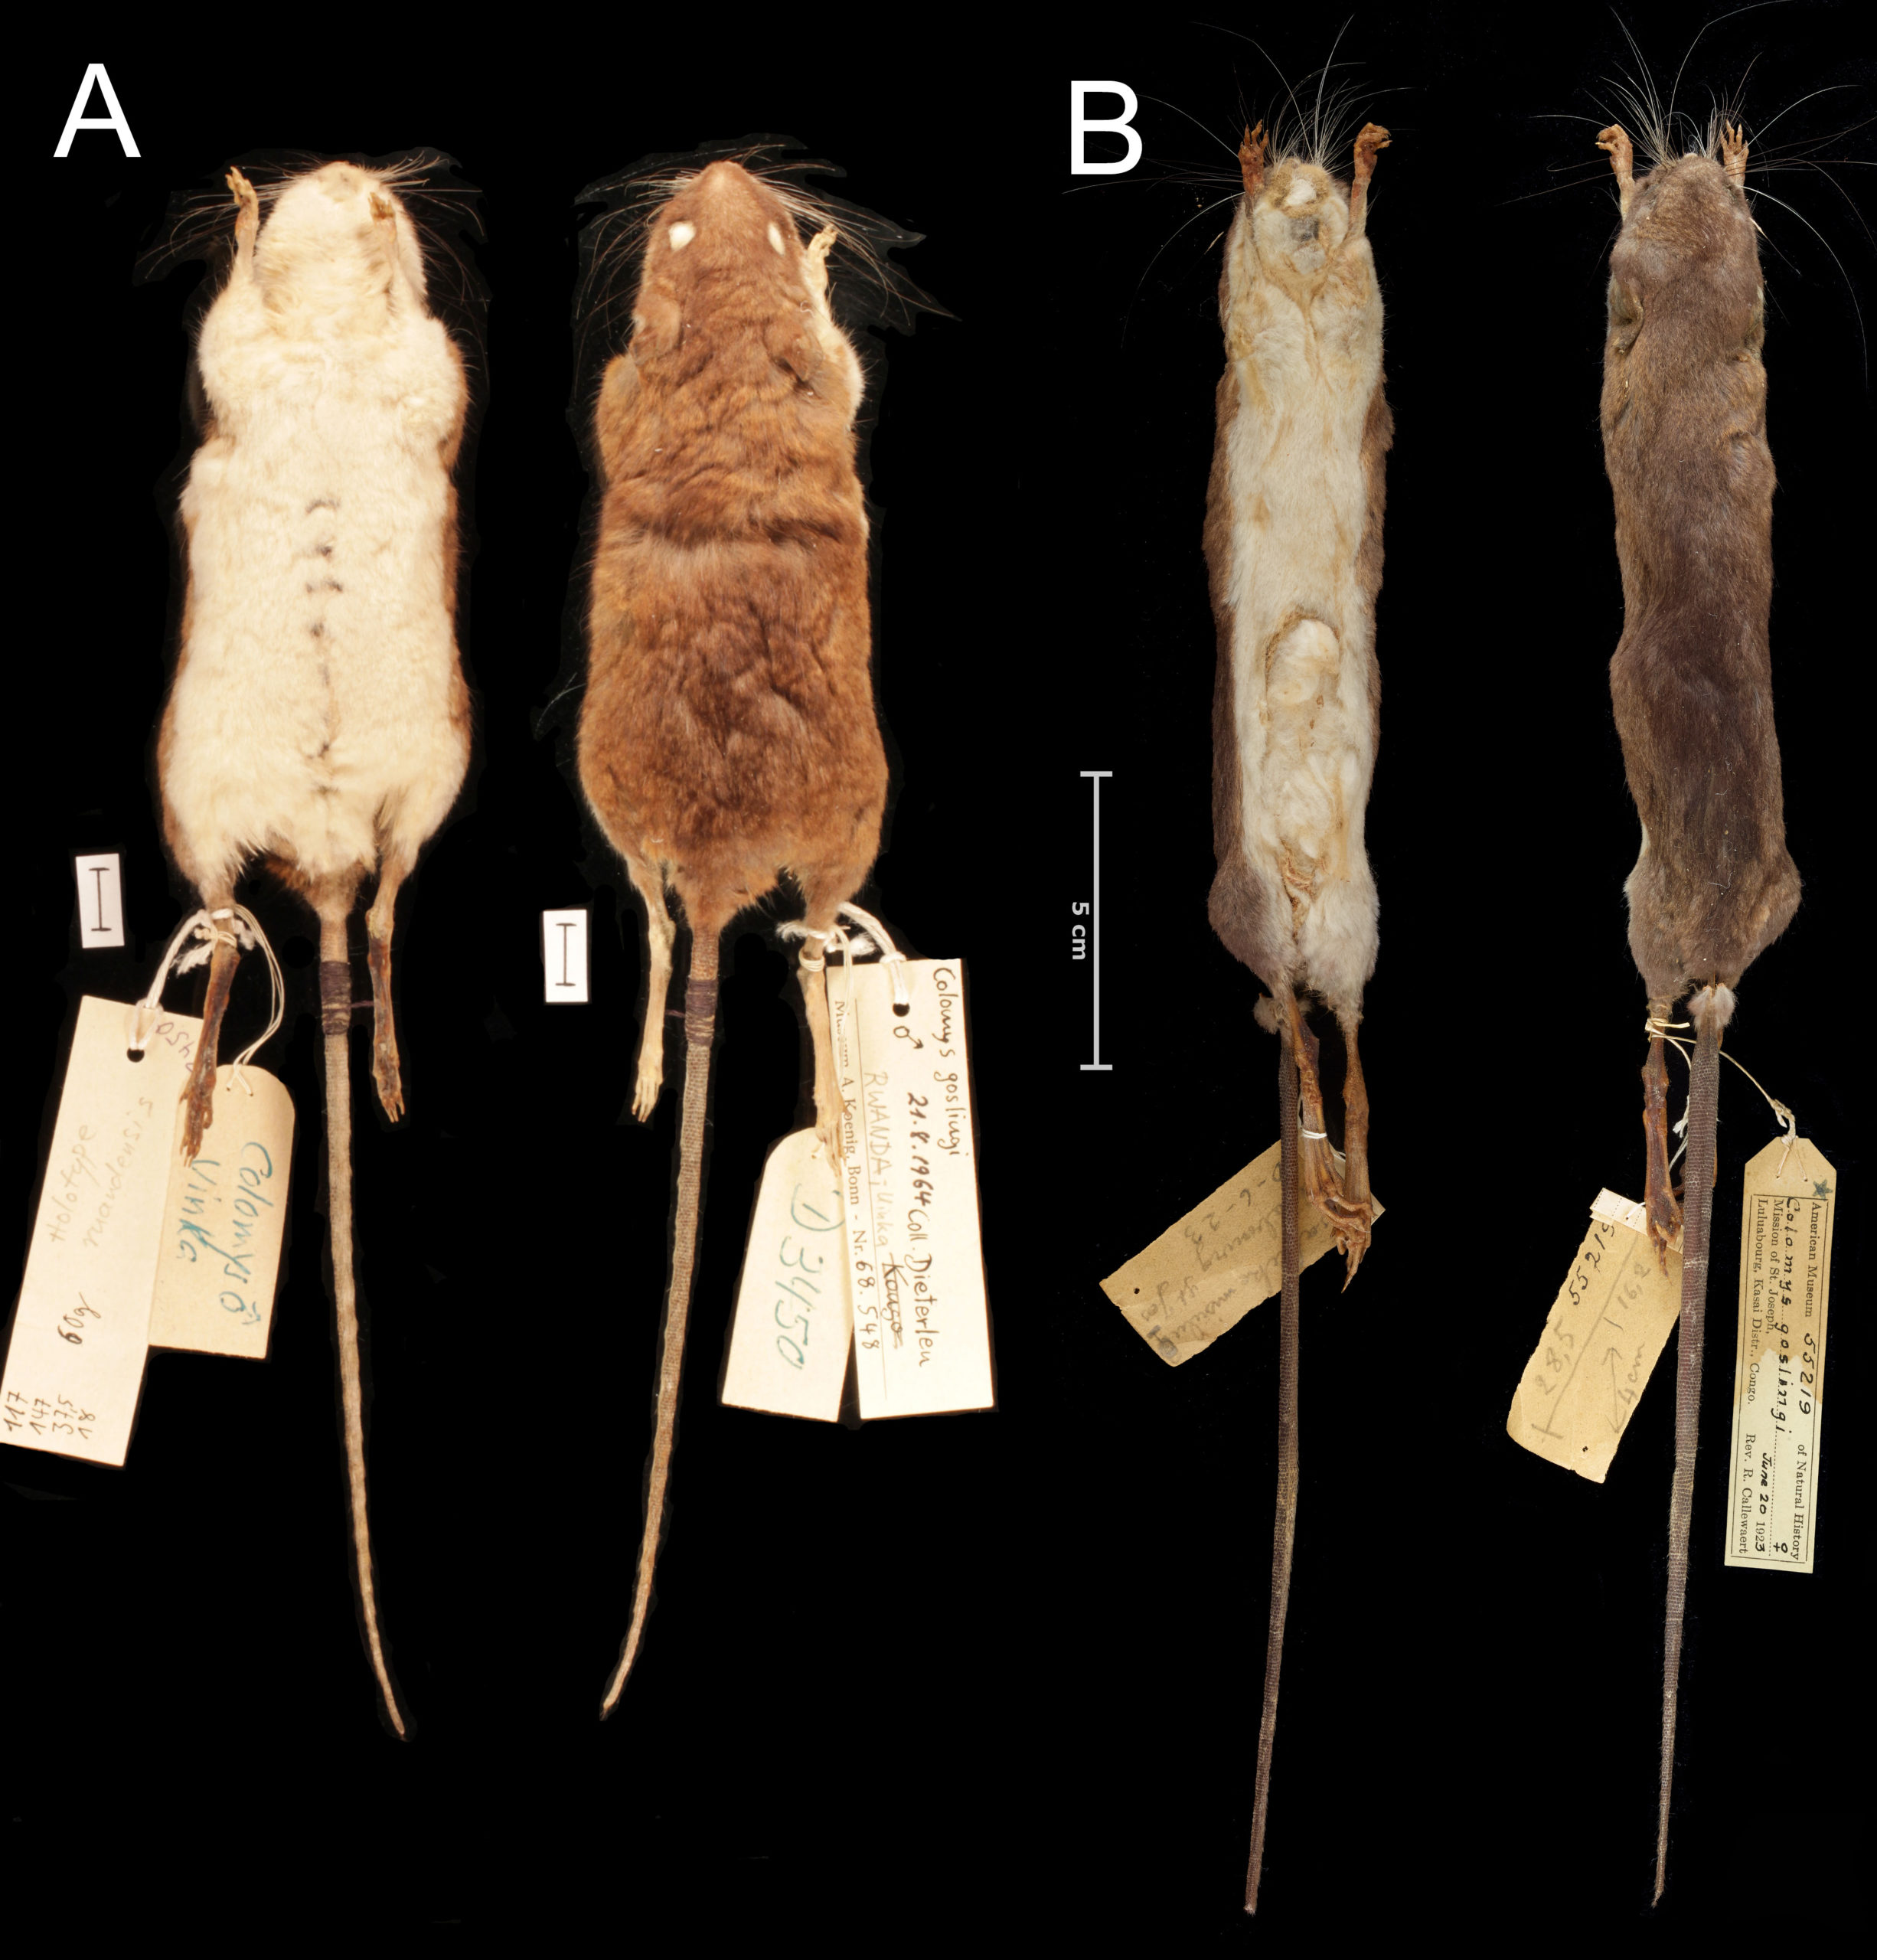 Specimens of the stilt mice studied in the new paper. The previously known species C. goslingi is on the left, and the newly described species C. lumumbai is on the right. (Image: T. C. Giarla et al., 2020)